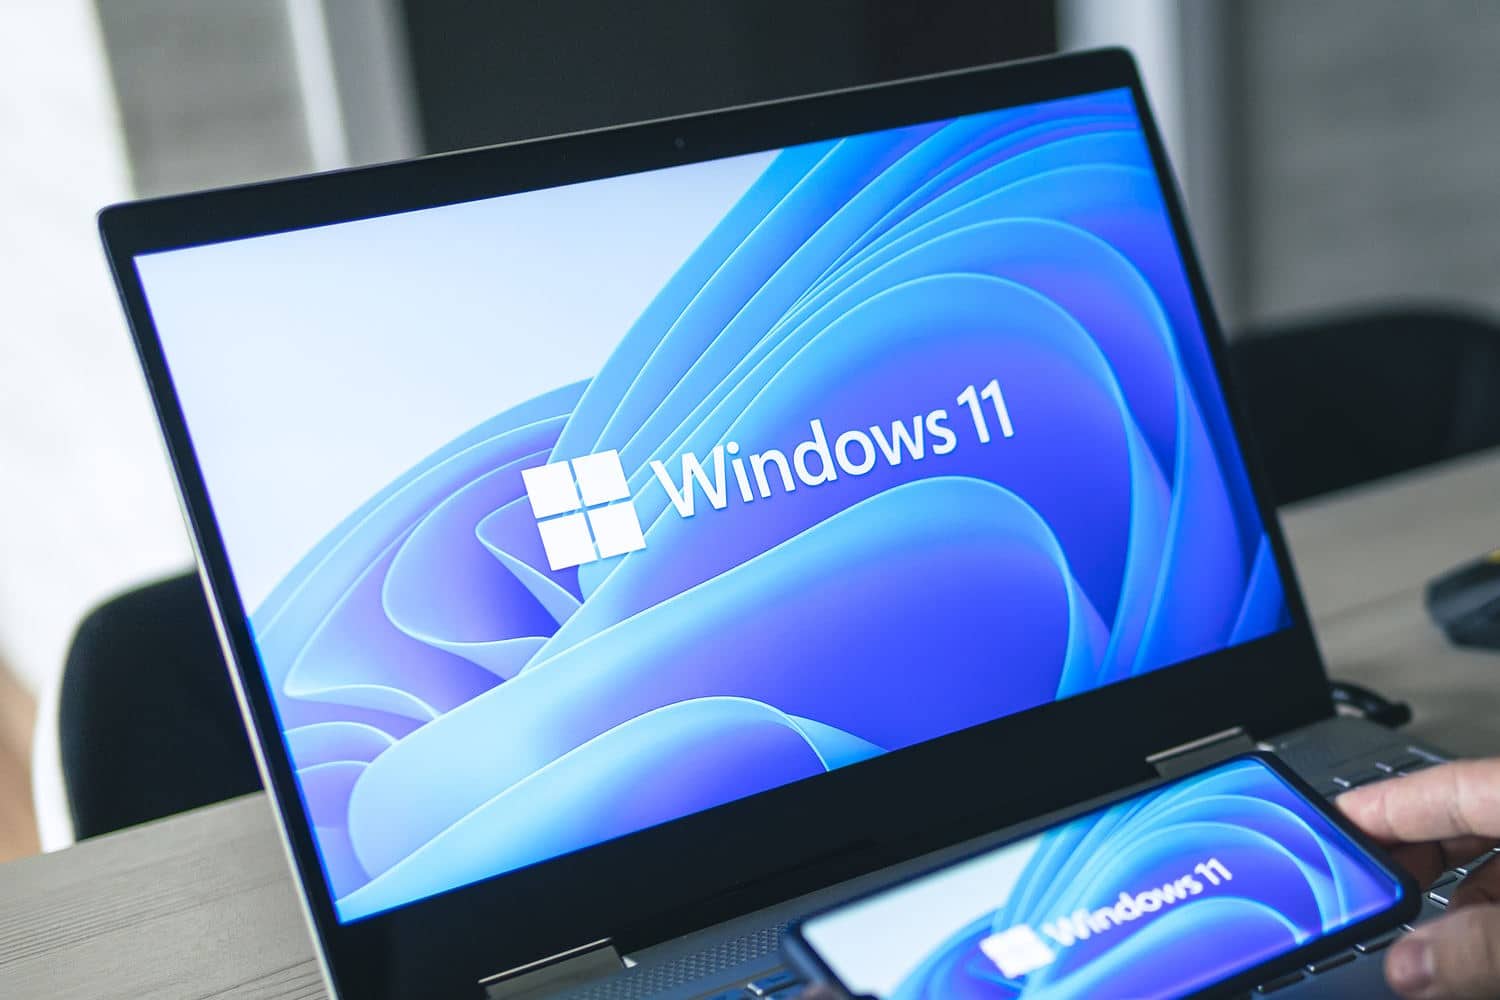 The Media Creation Tool finally lets you install Windows 11 23H2